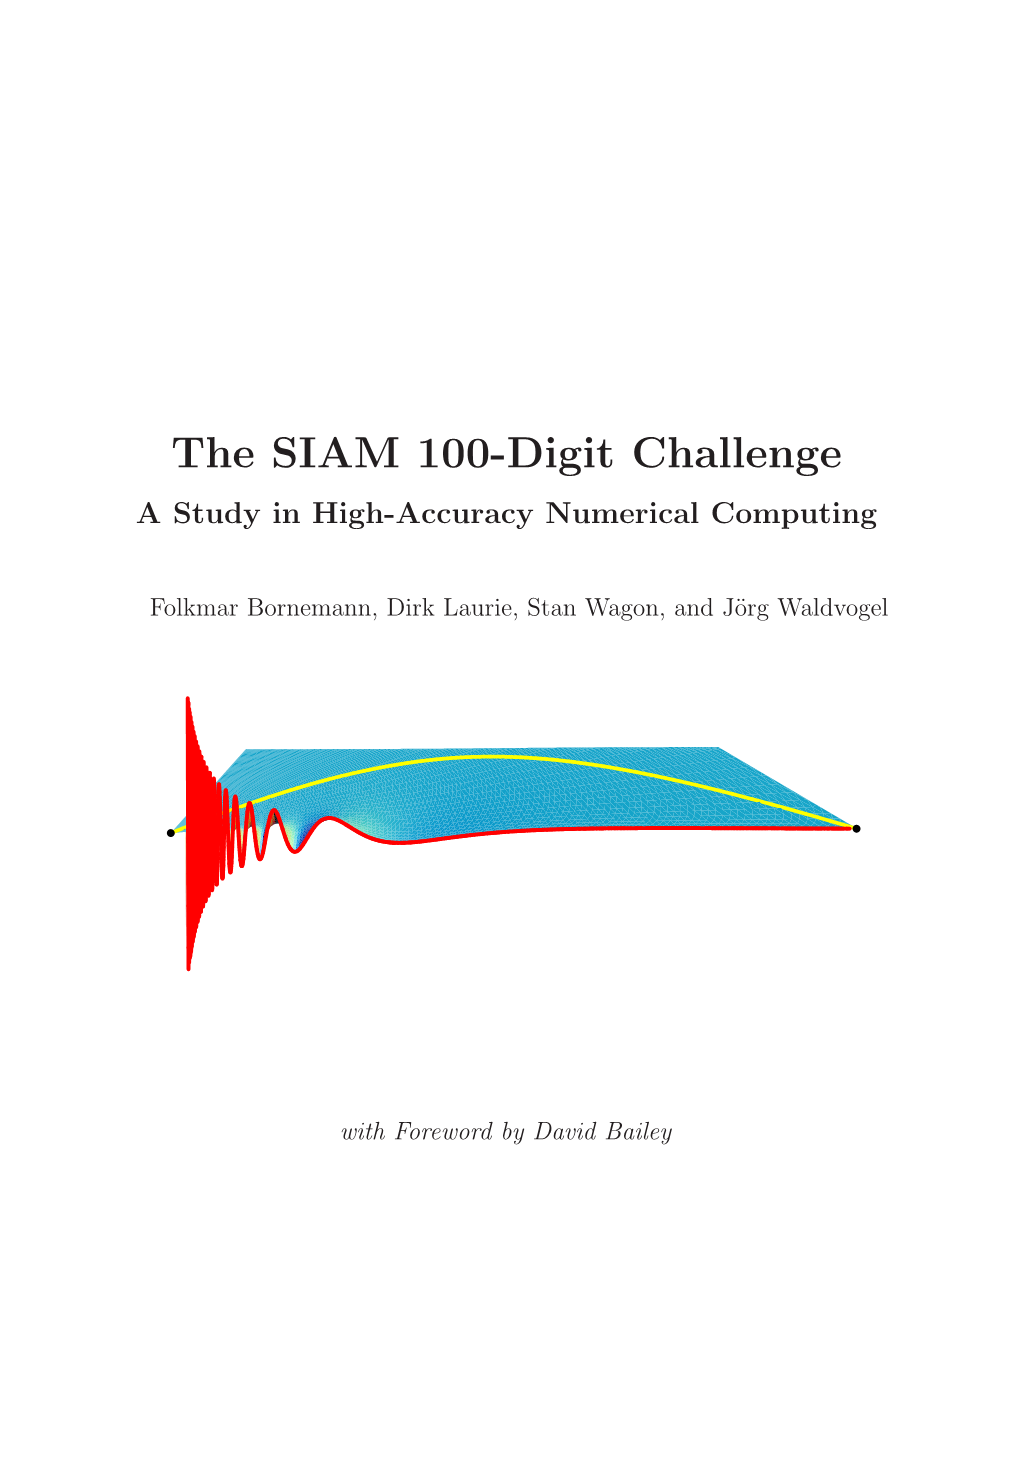 The SIAM 100-Digit Challenge a Study in High-Accuracy Numerical Computing